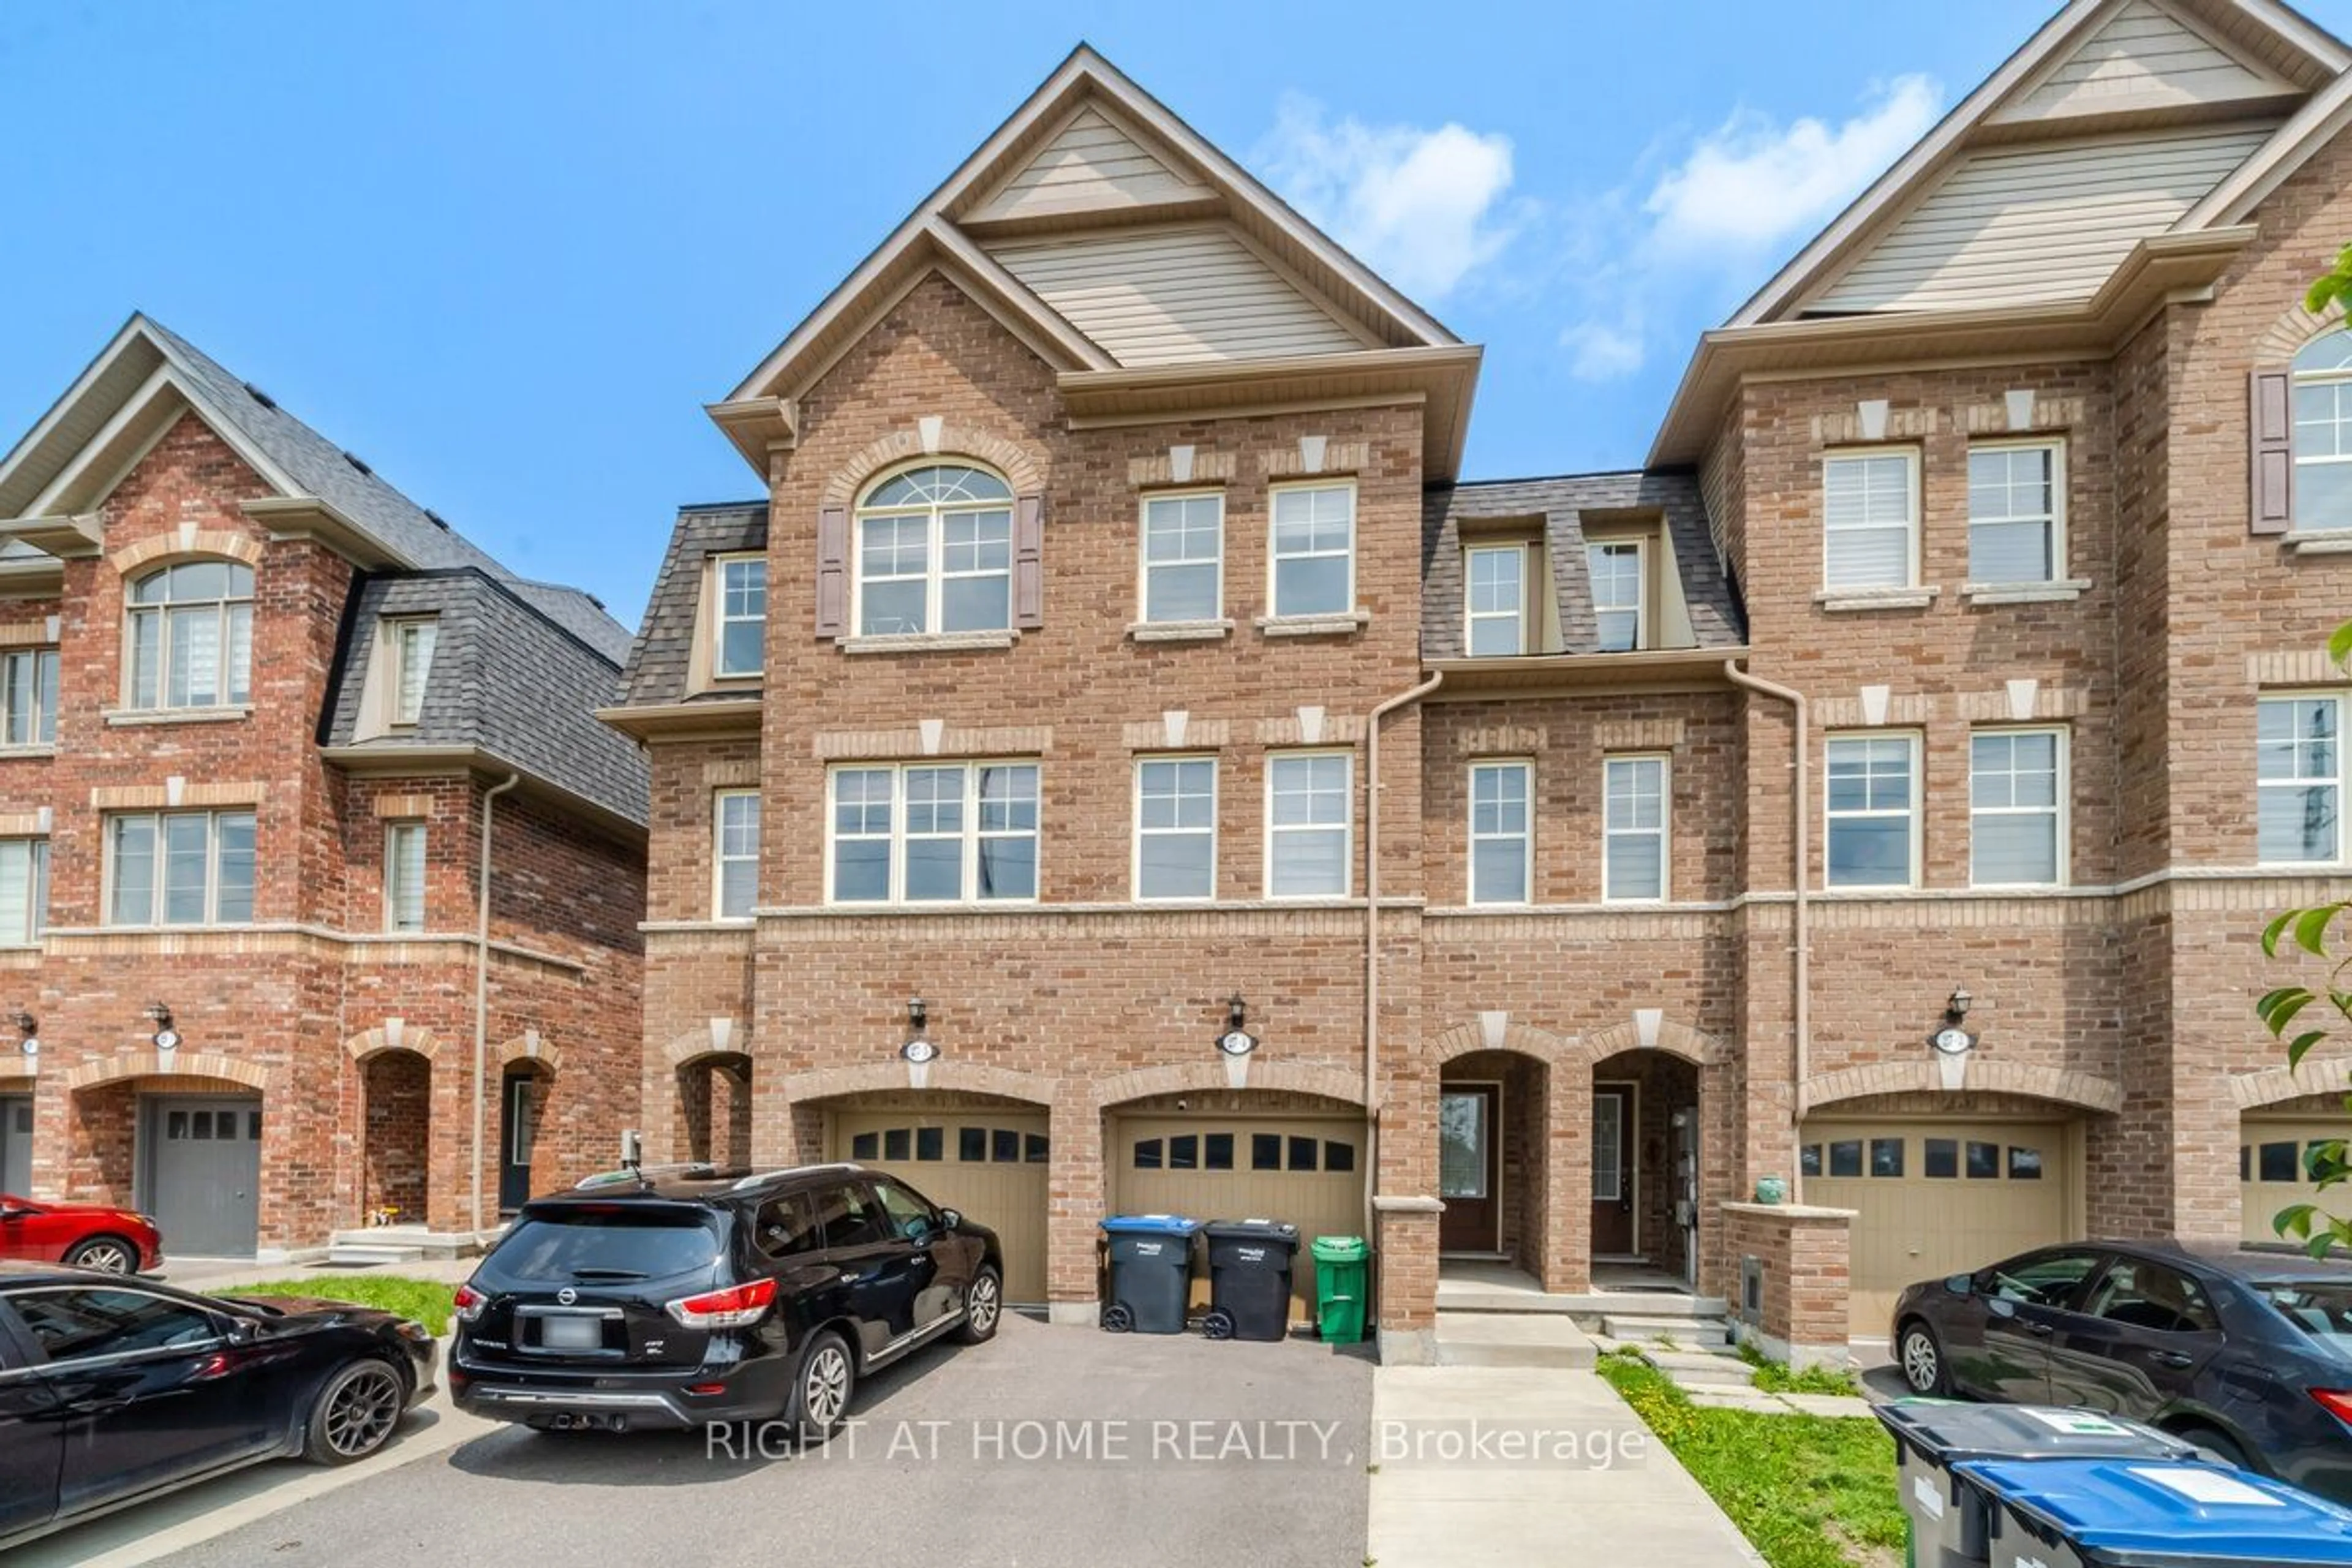 A pic from exterior of the house or condo for 27 Pennycross Cres #4, Brampton Ontario L7A 4M1